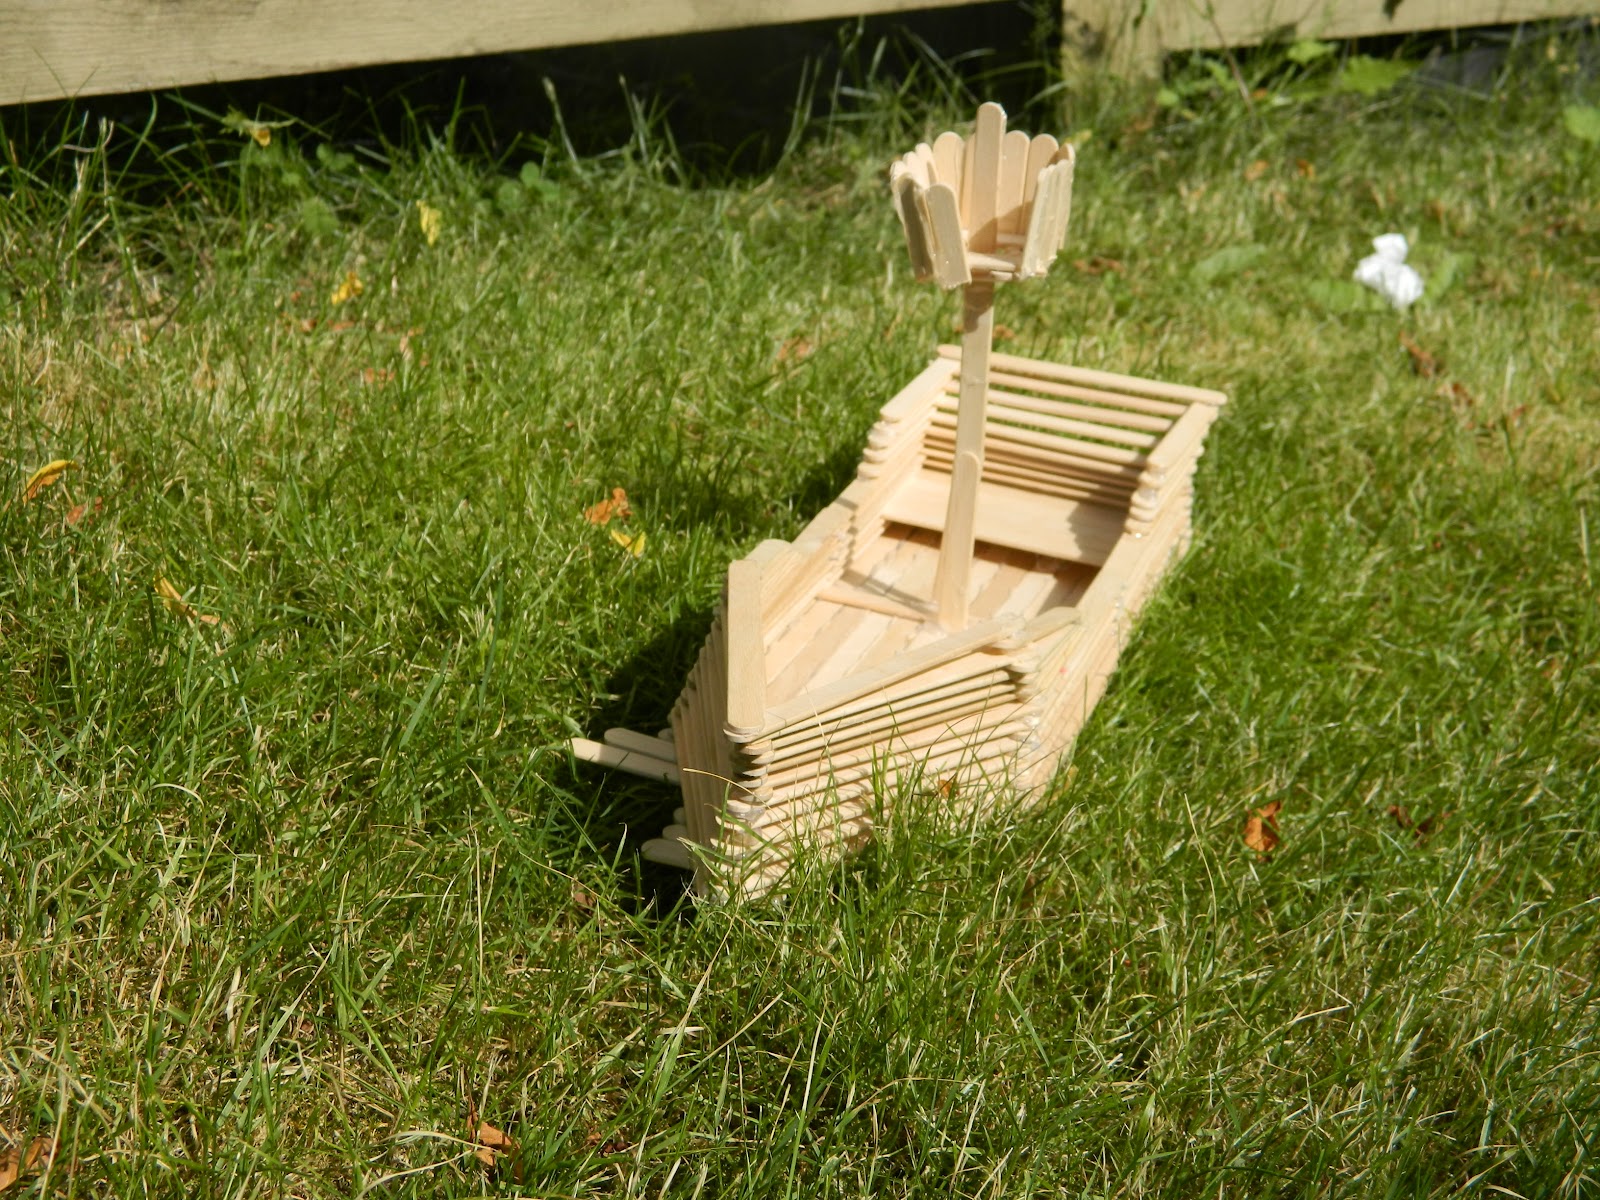 Related Pictures Famous popsicle stick catapult